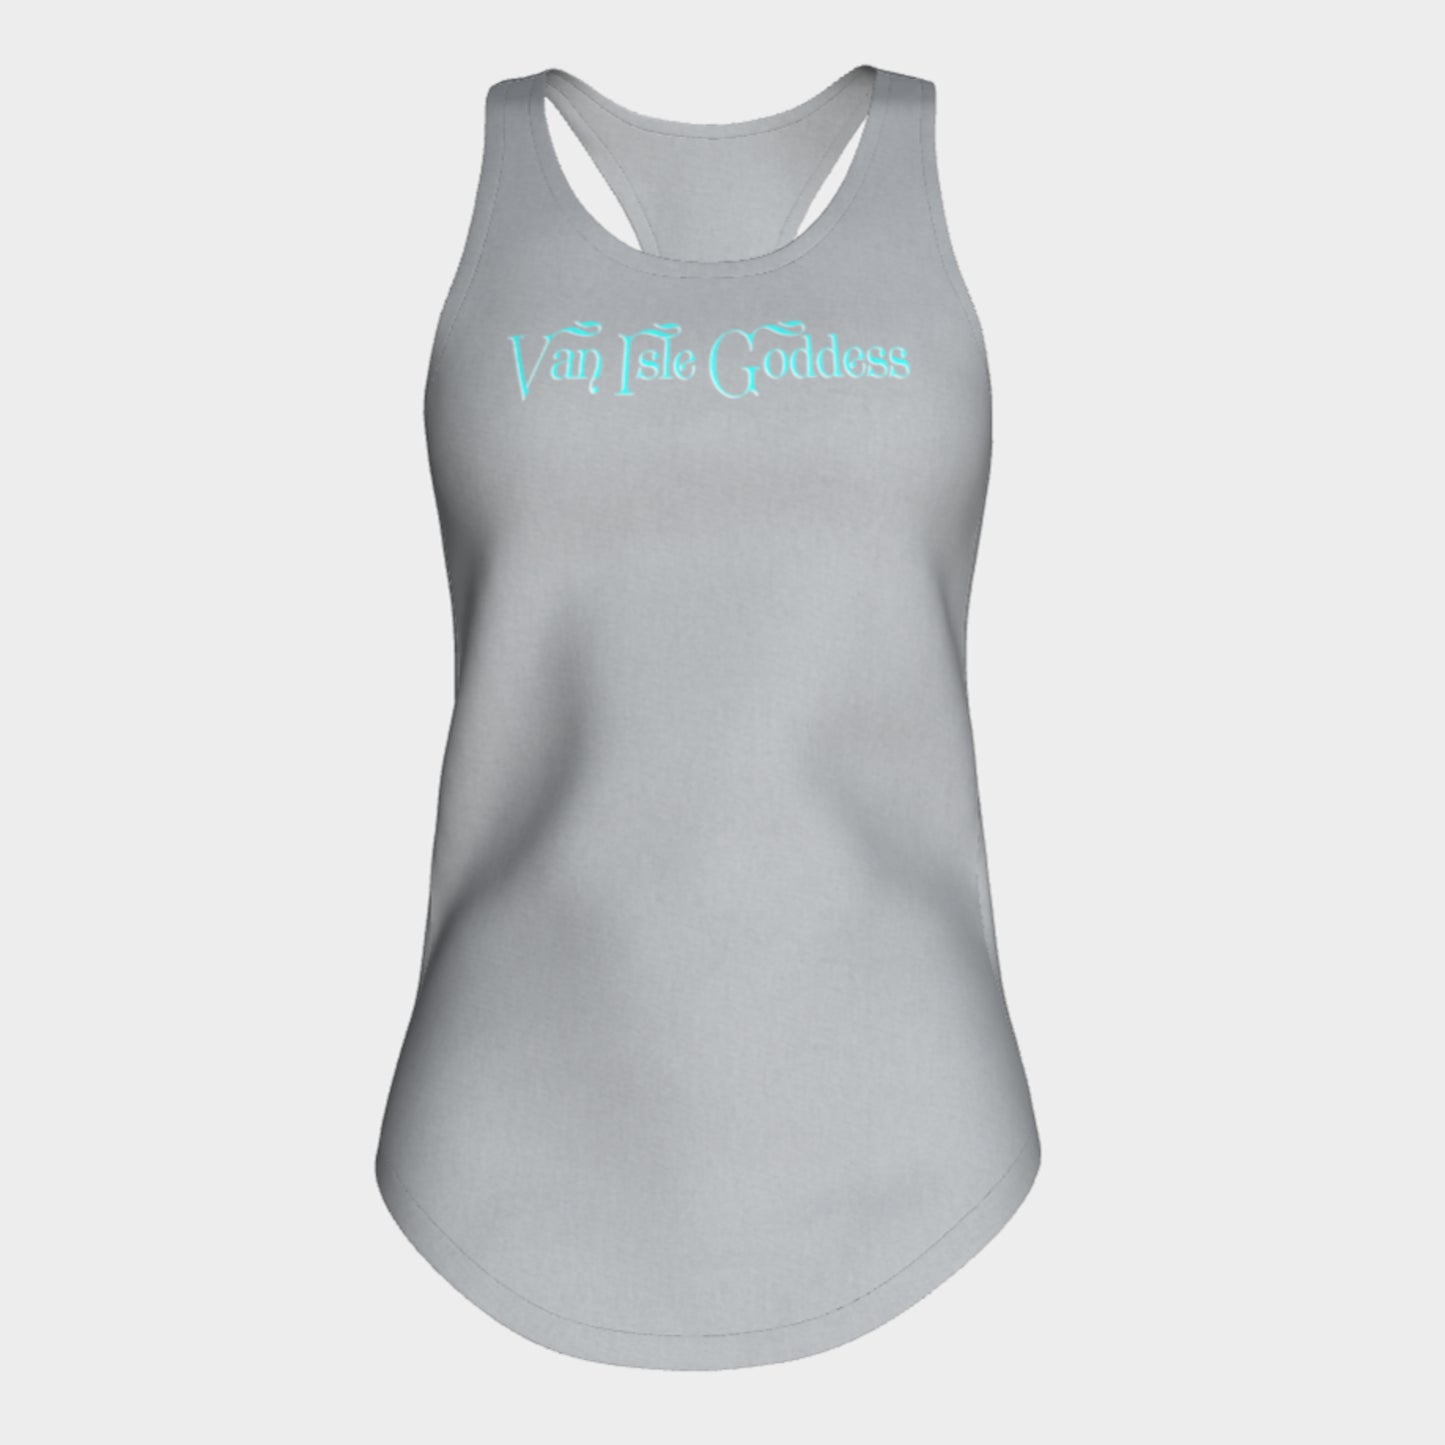 Van Isle Goddess Racerback Tank Top  Excellent choice for the summer or for working out.   Made from 60% spun cotton and 40% poly for a mix of comfort and performance, you get it all (including my photography and digital art) with this custom printed racerback tank top. 